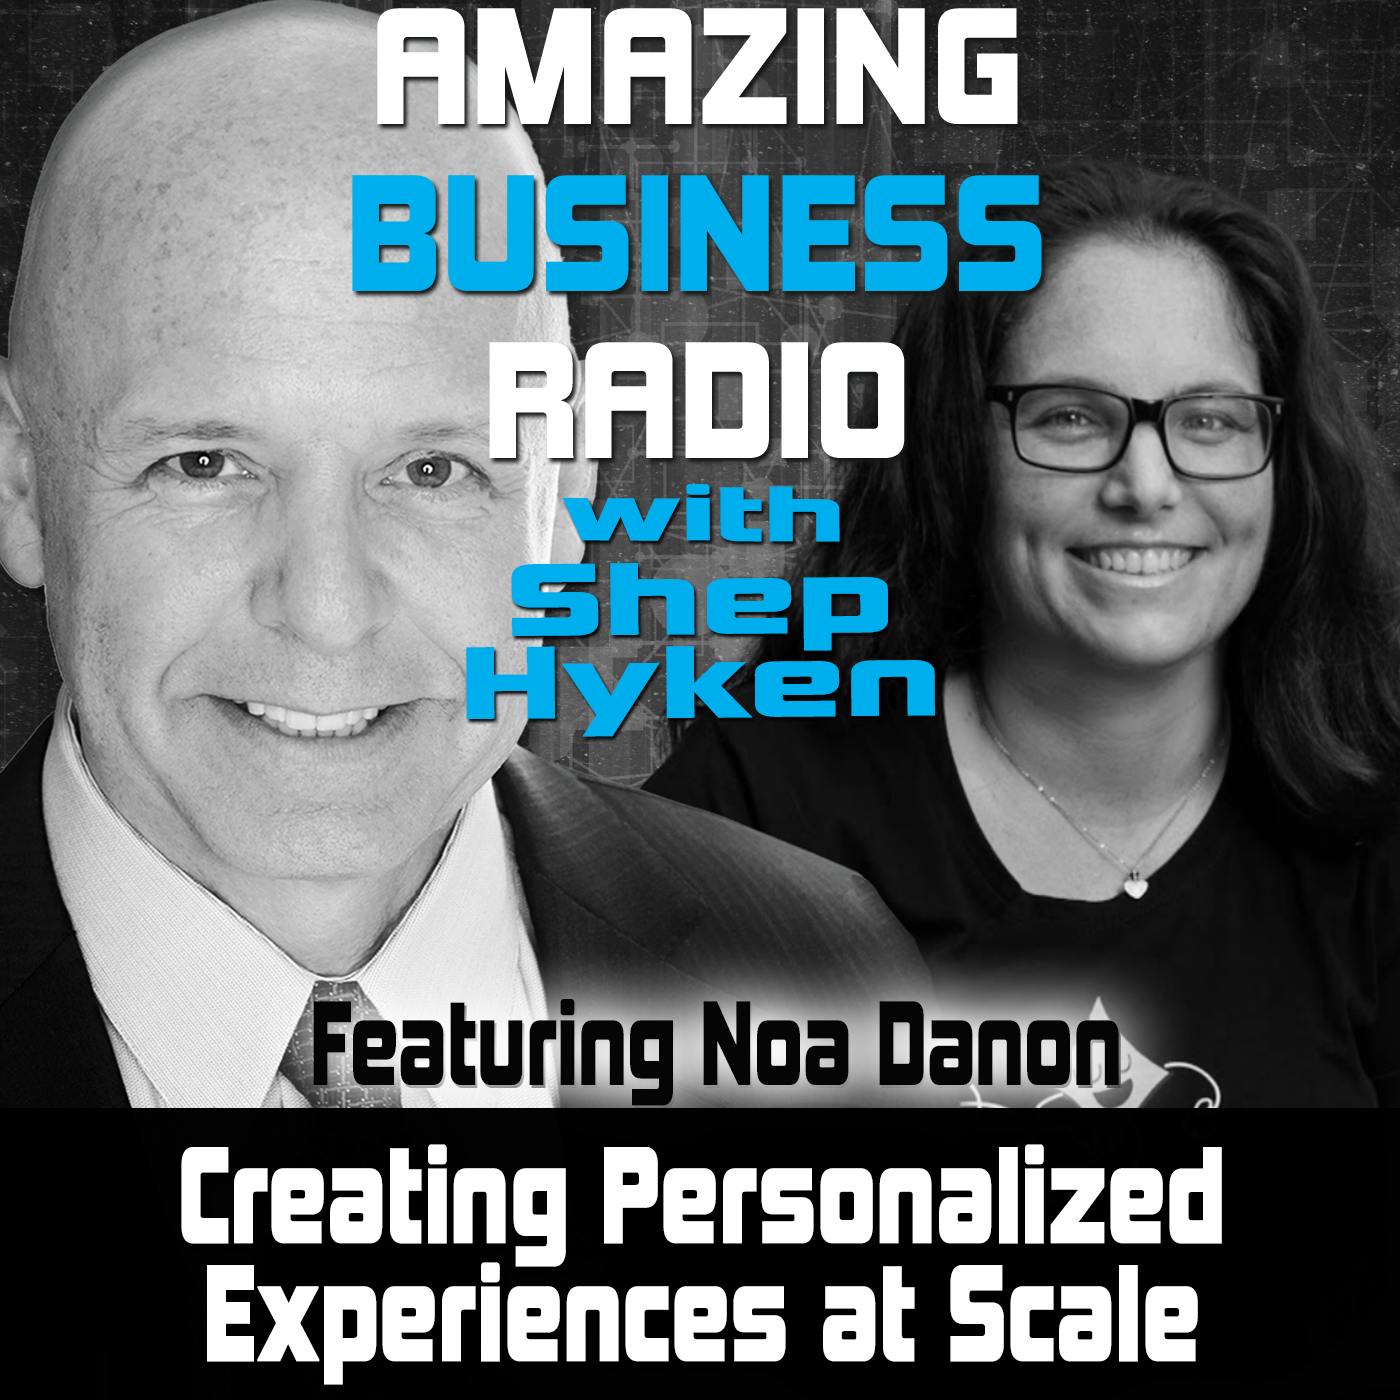 Creating Personalized Experiences at Scale Featuring Noa Danon